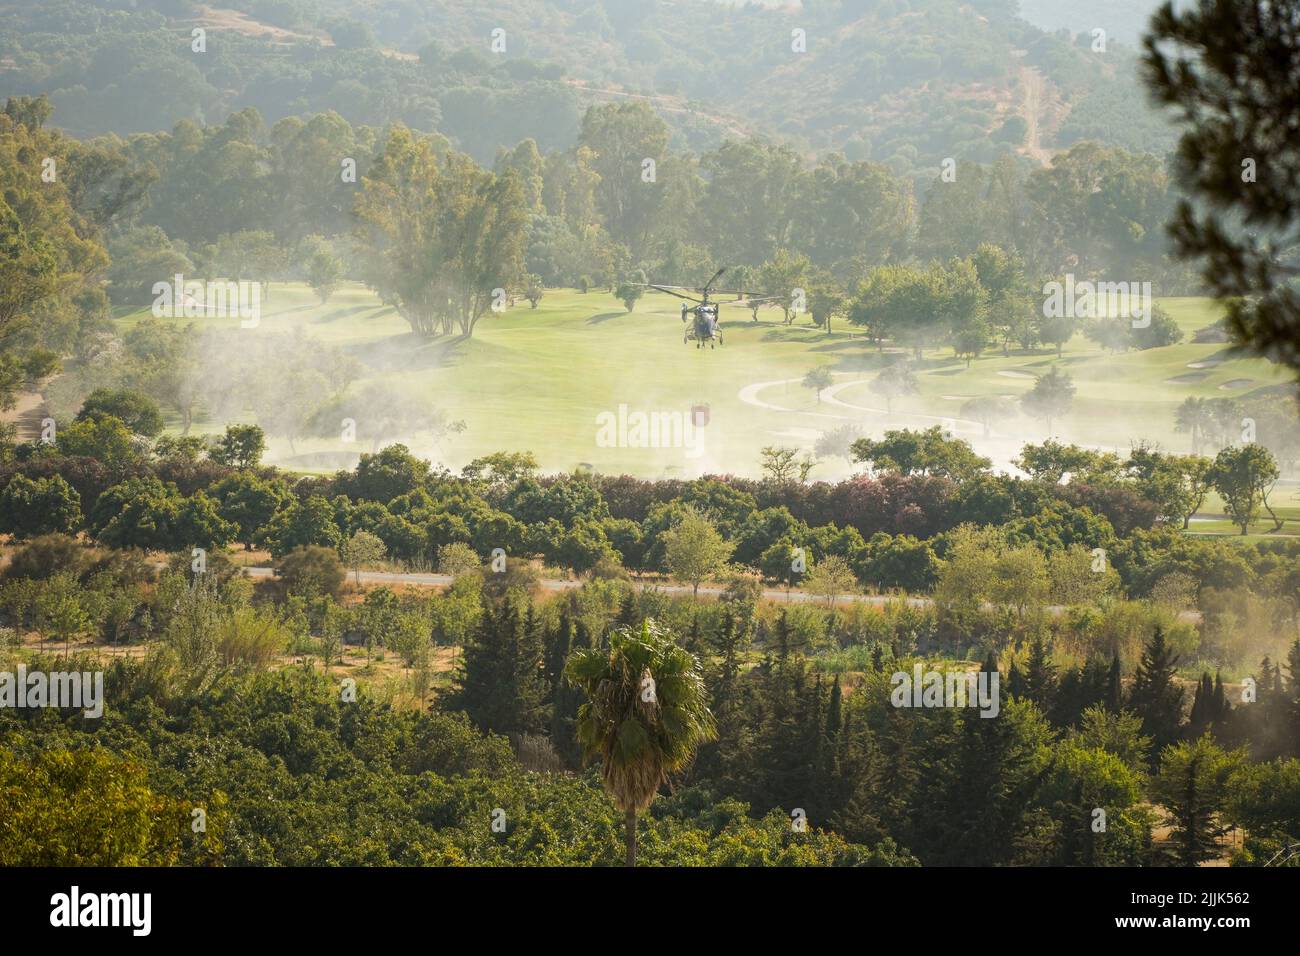 Helicopter of INFOCA scooping up water from a artificial pond on a golf course, to drop on a wildfire, Mijas, Spain. Stock Photo